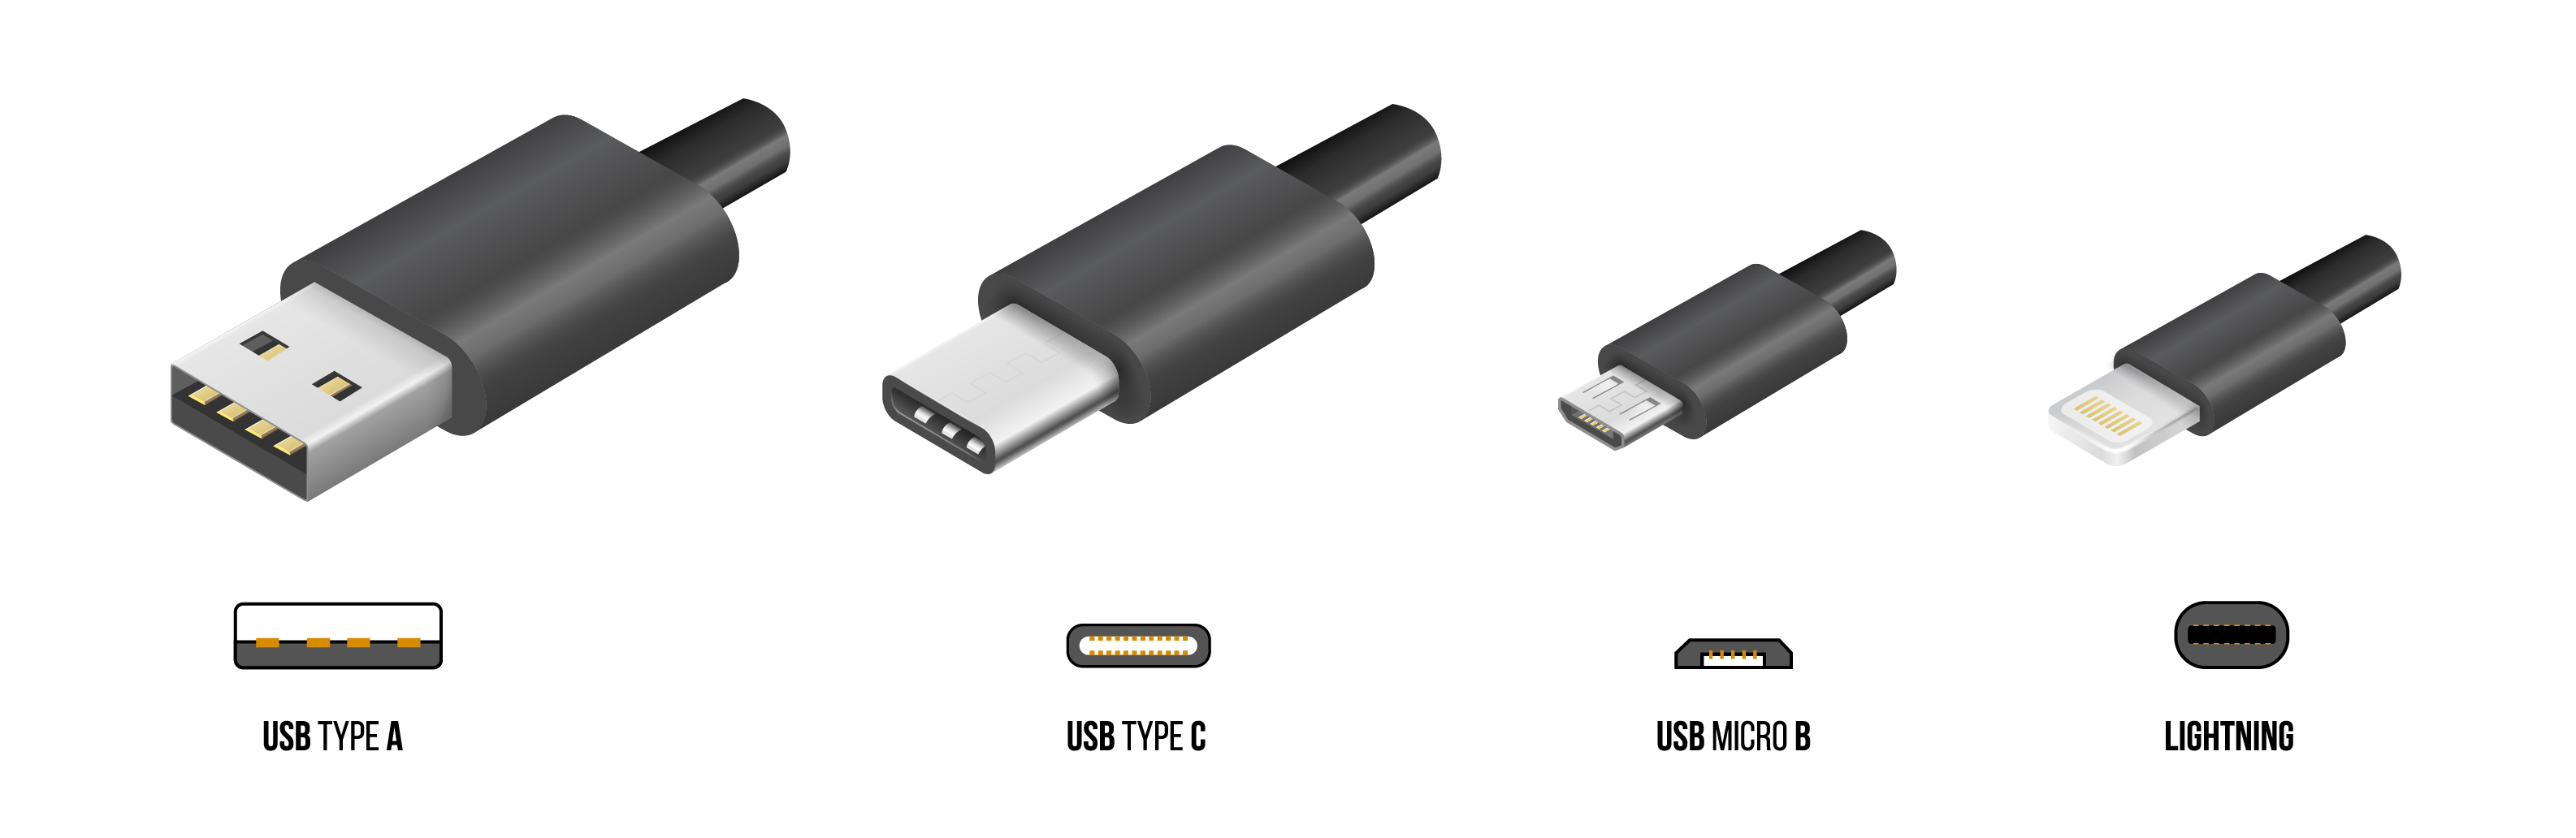 USB-C vs. USB-A: What's the difference?